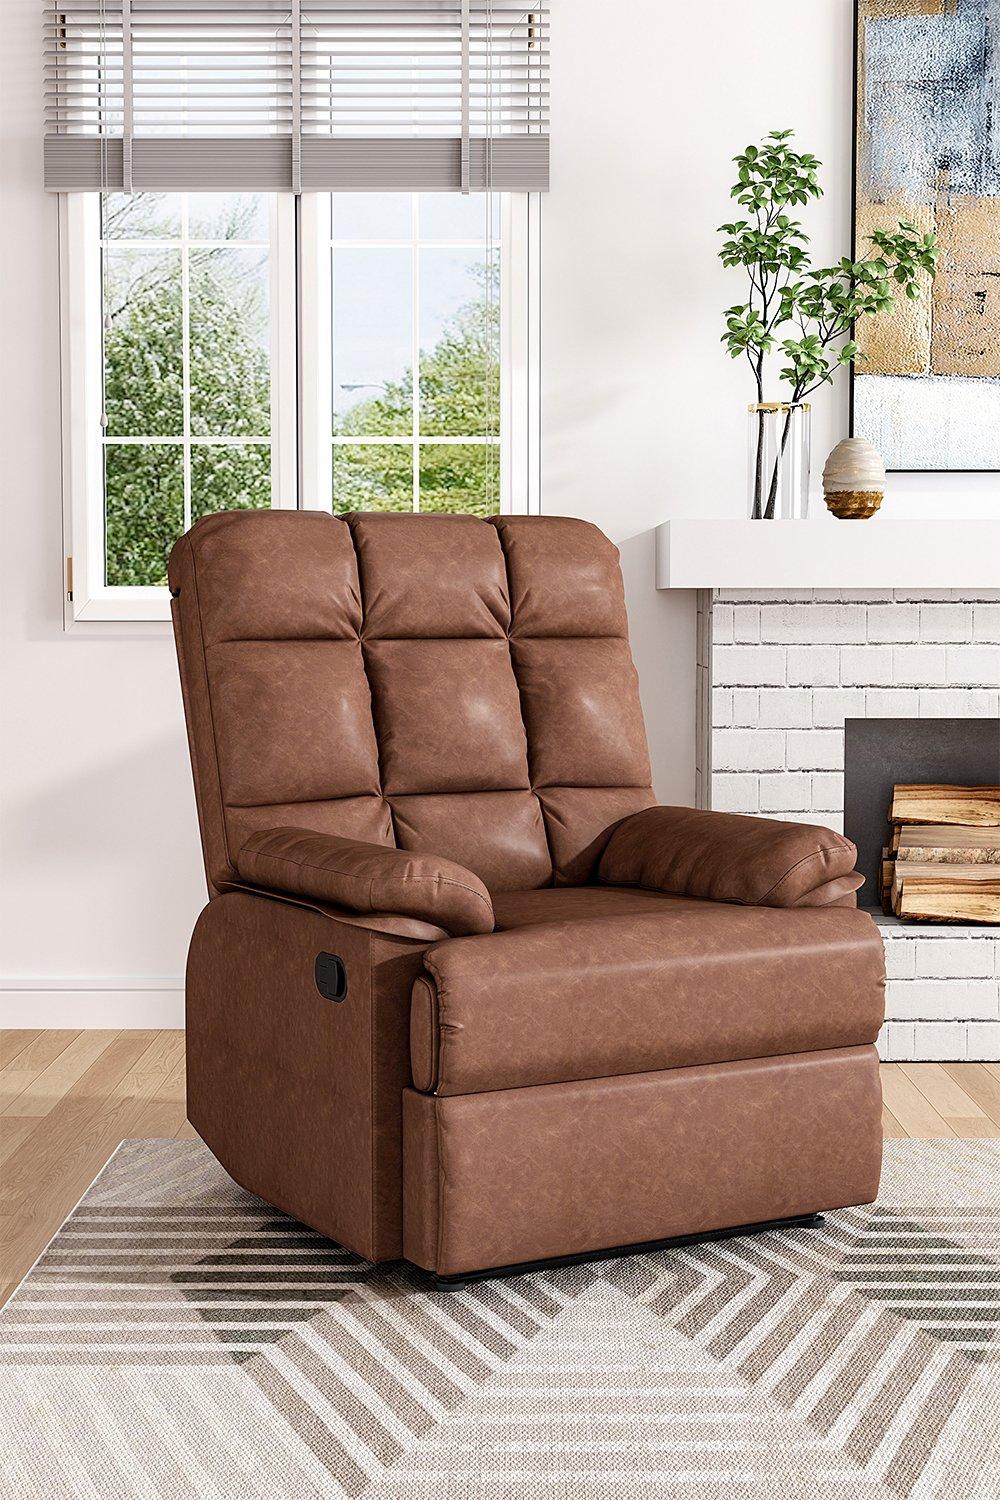 Brown Checkered Faux Leather Upholstered Recliner Armchair